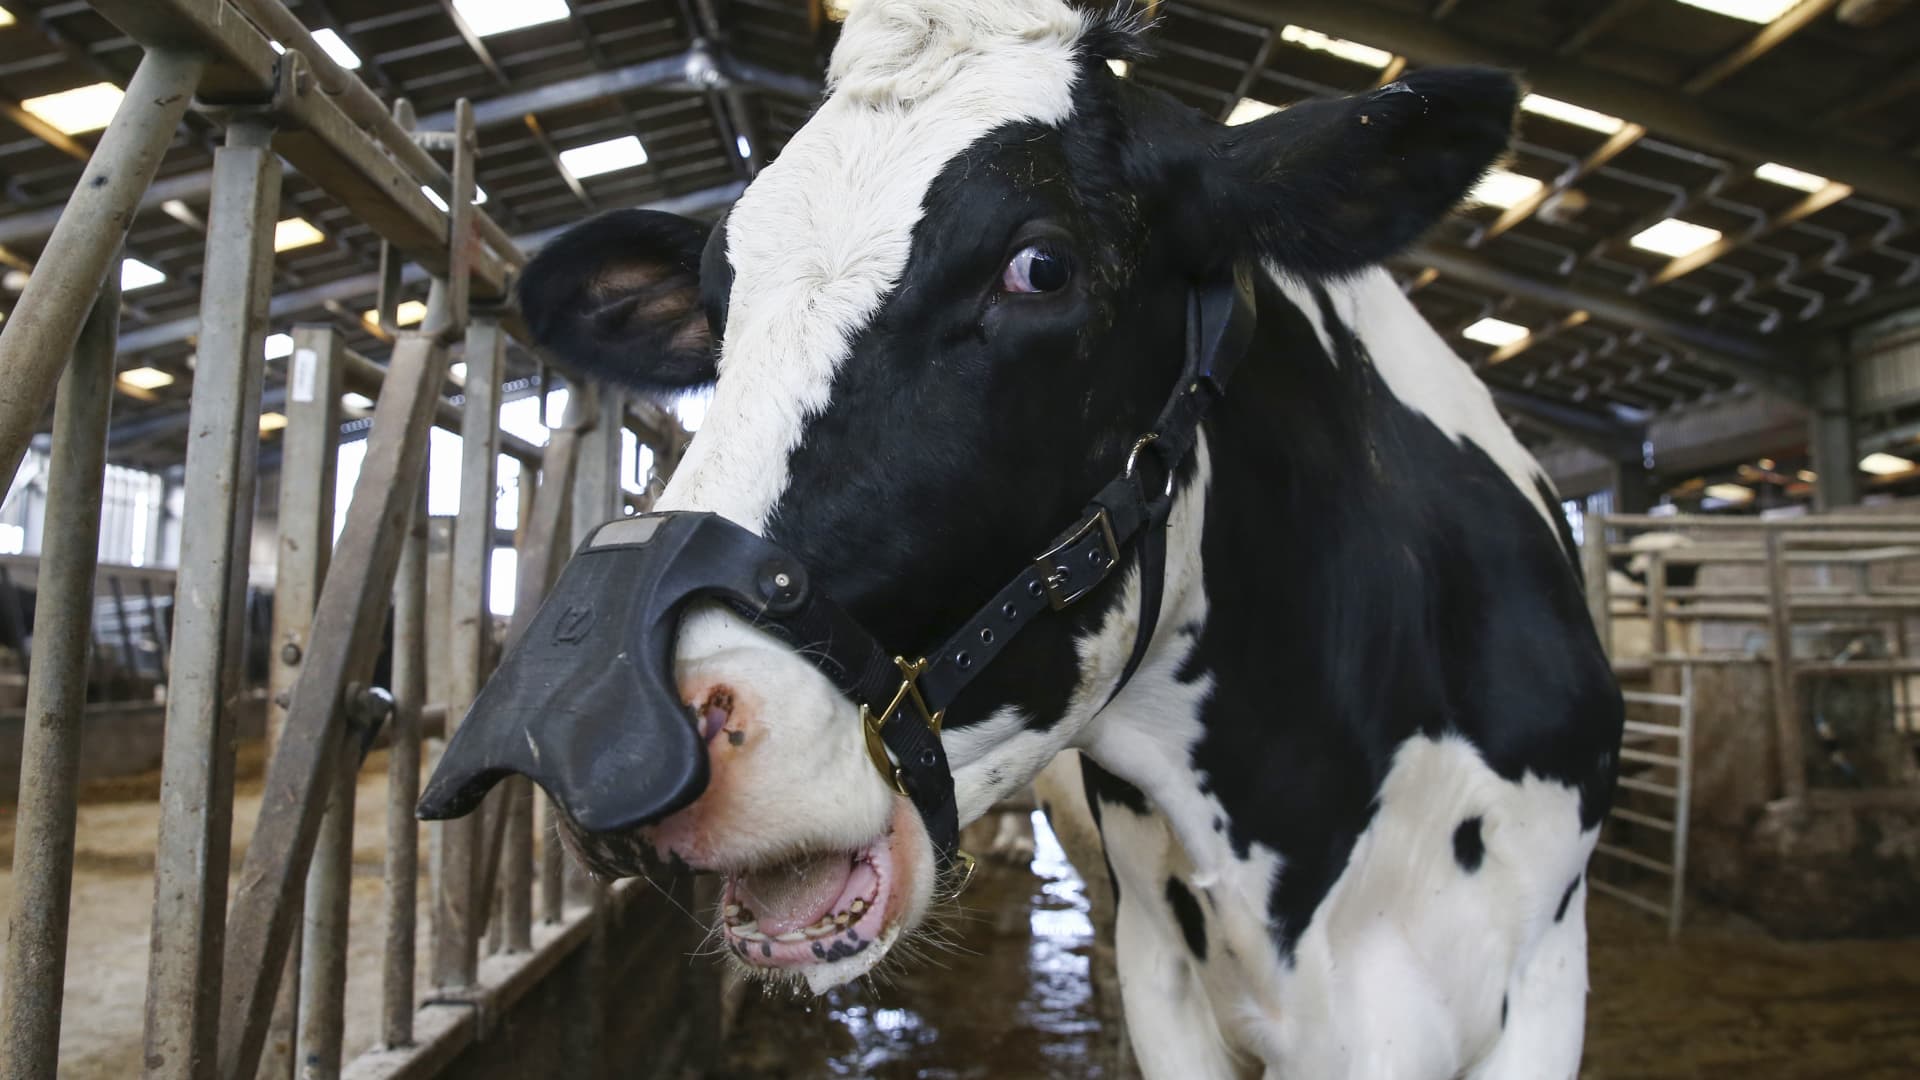 A dairy cow fitted with a wearable methane reducing mask, developed by Zelp Ltd., stands in a barn at a farm in Hertfordshire, U.K., on Friday, Feb. 21, 2020.